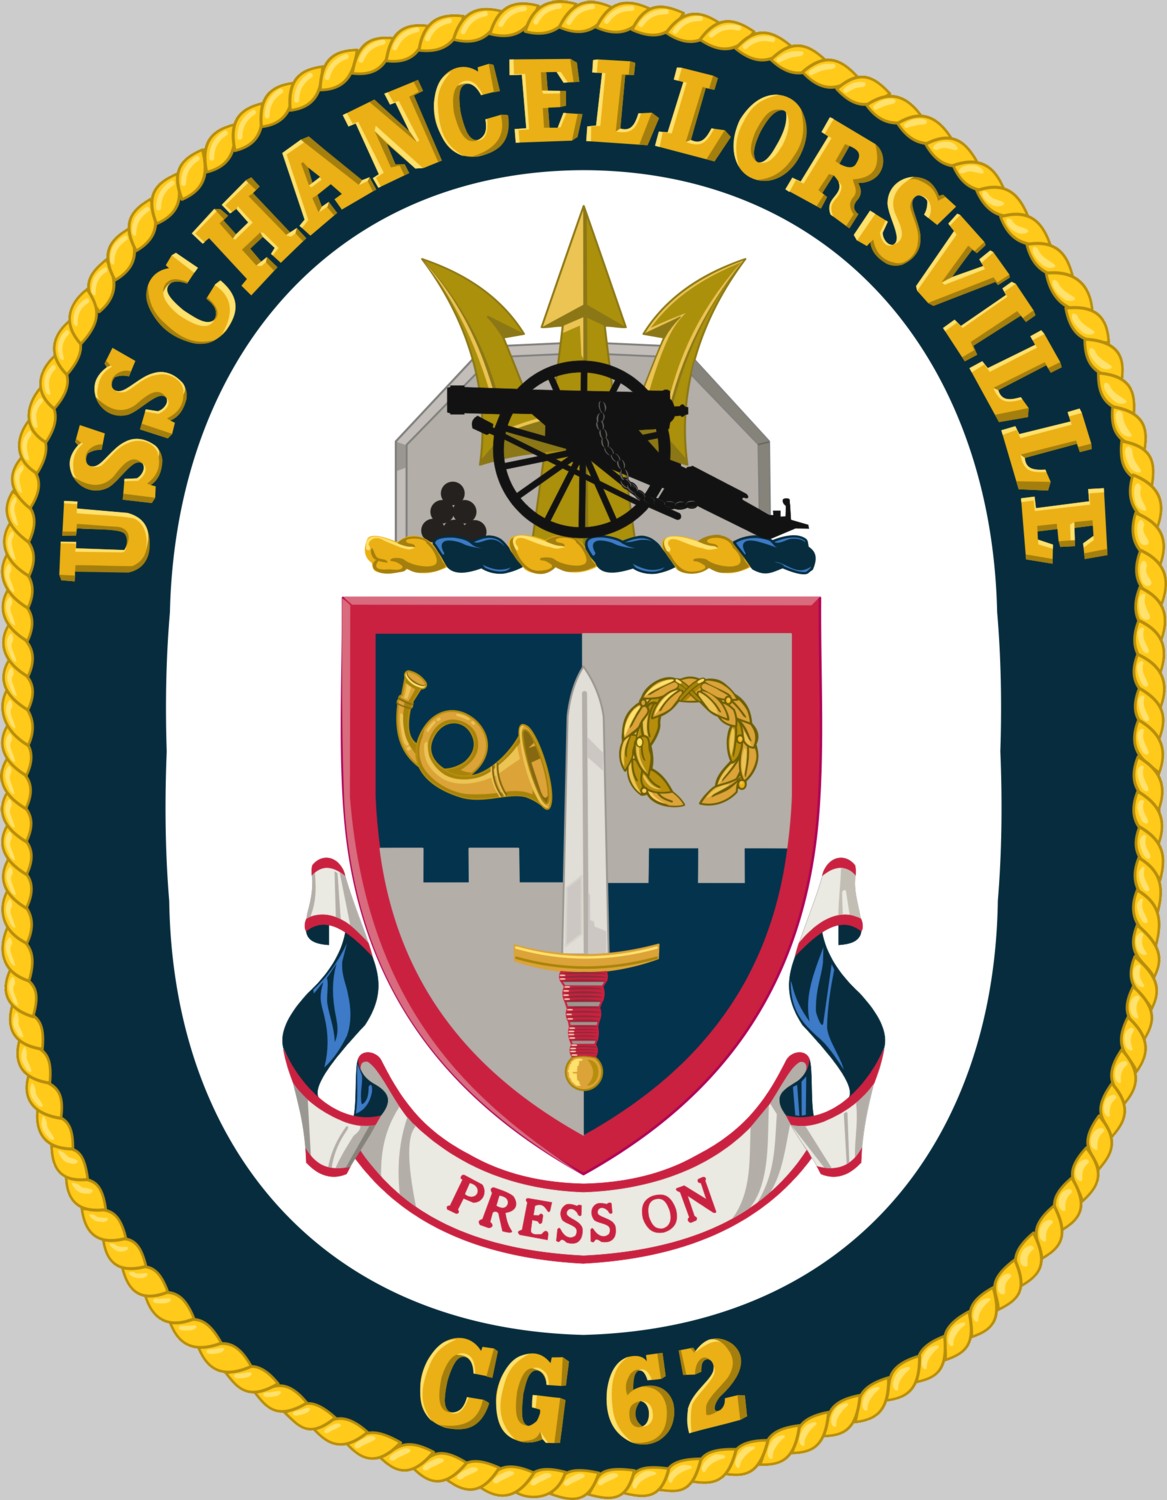 cg-62 uss chancellorsville insignia crest patch badge ticonderoga class guided missile cruiser aegis us navy 02c